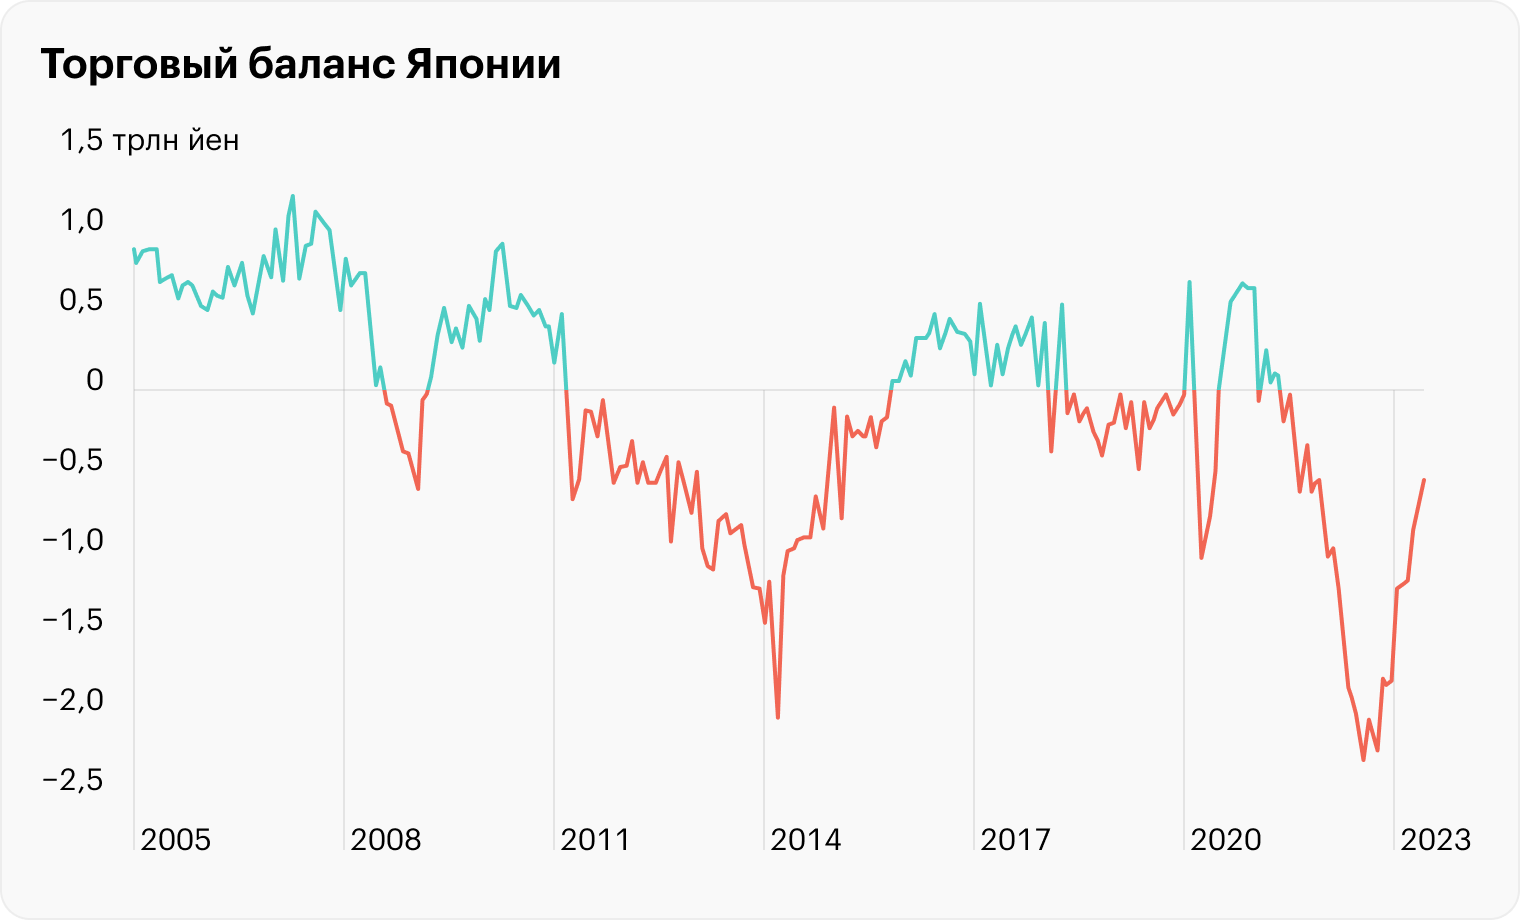 Источник: Daily Shot, The trade deficit continues to narrow